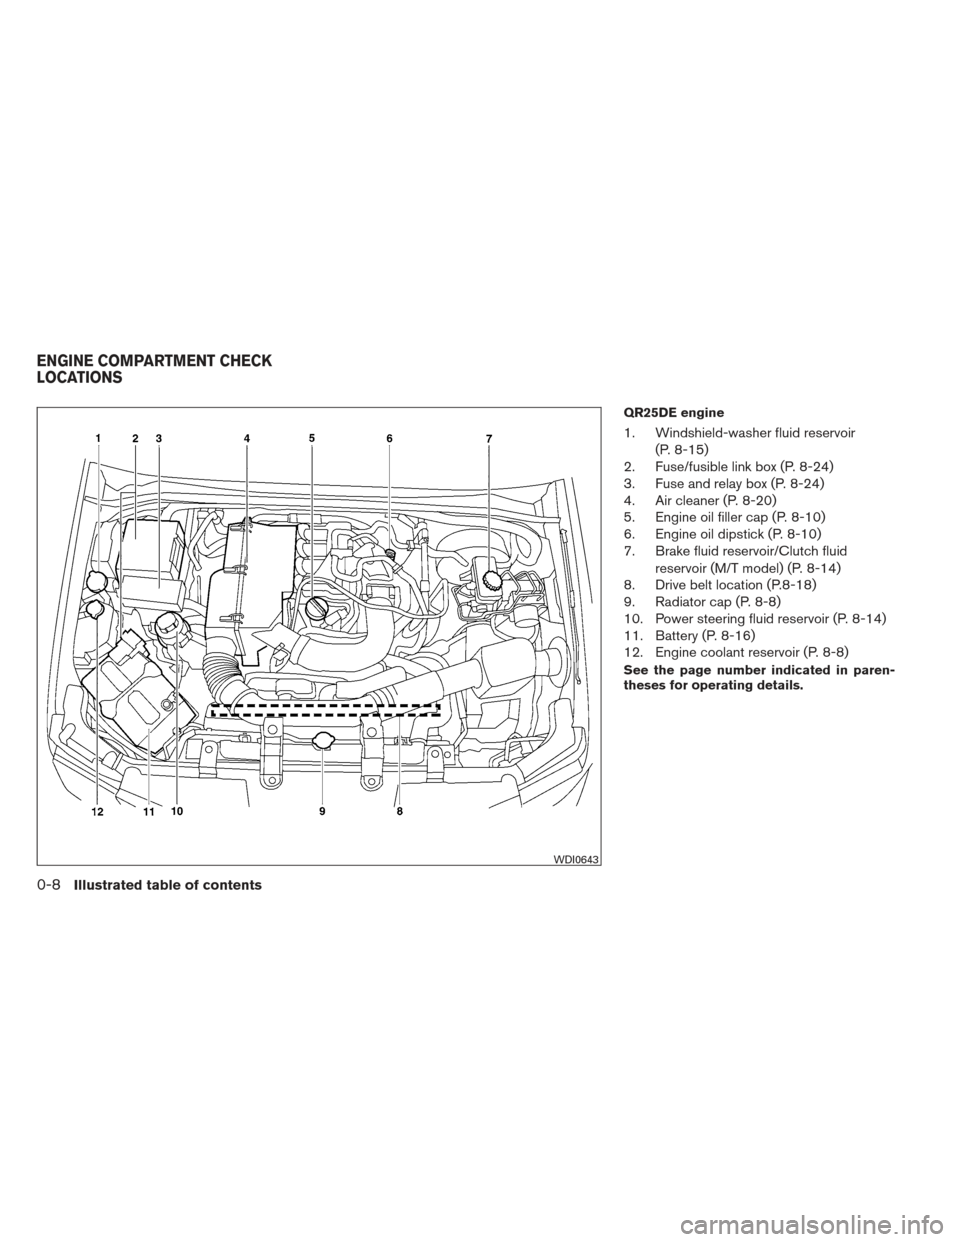 NISSAN FRONTIER 2013 D40 / 2.G User Guide QR25DE engine
1. Windshield-washer fluid reservoir(P. 8-15)
2. Fuse/fusible link box (P. 8-24)
3. Fuse and relay box (P. 8-24)
4. Air cleaner (P. 8-20)
5. Engine oil filler cap (P. 8-10)
6. Engine oil